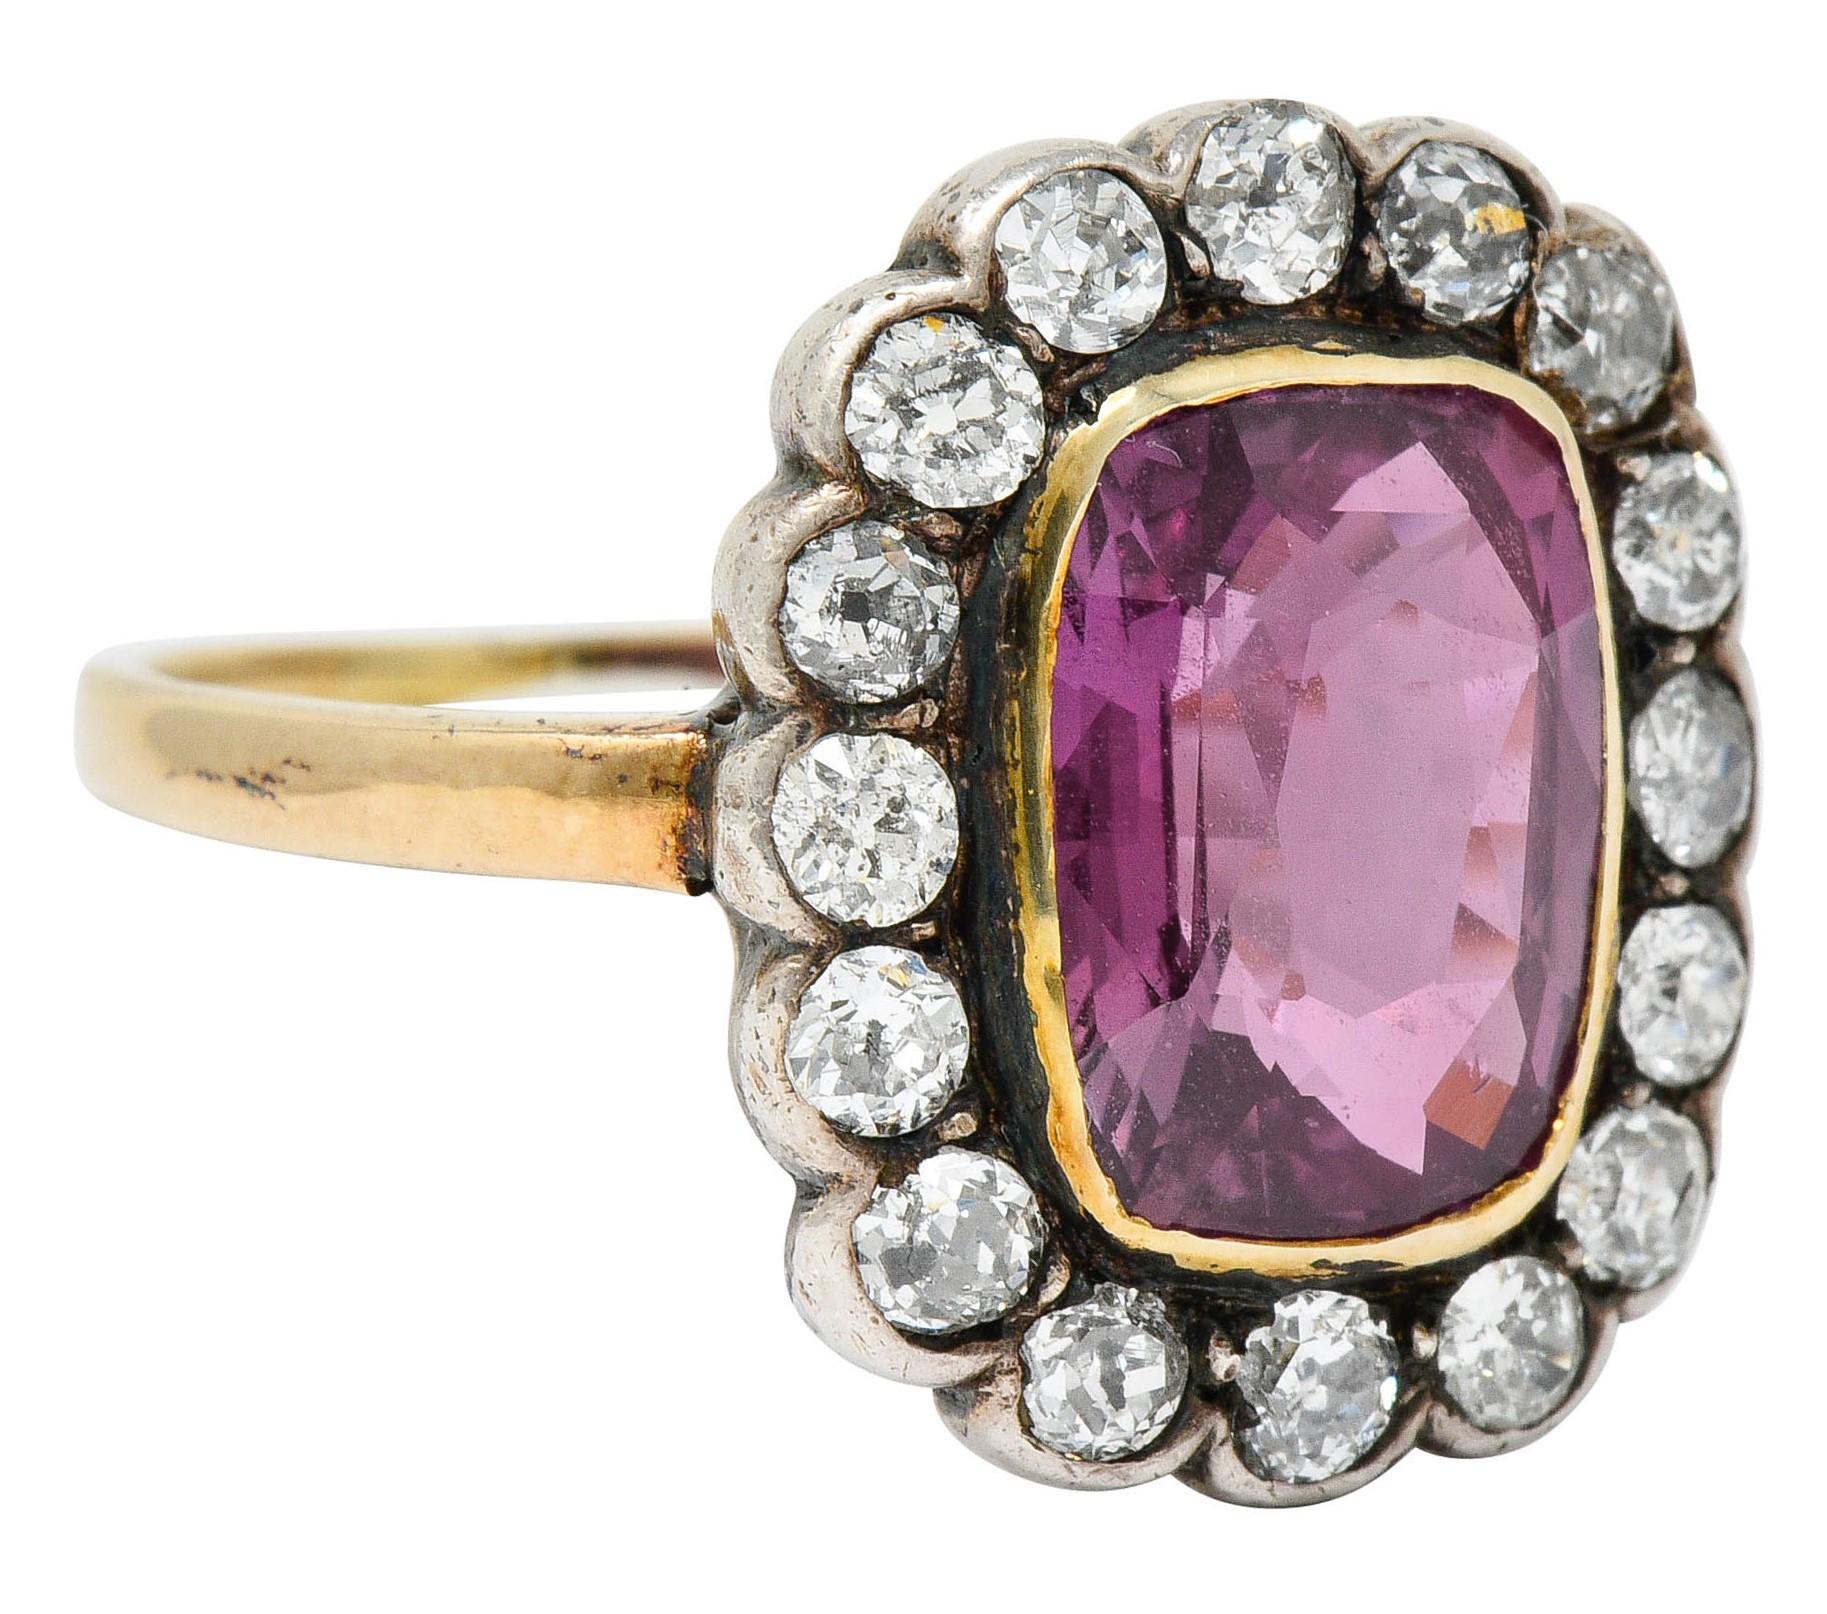 Cluster ring centers a rectangular cushion cut pink sapphire weighing 3.95 carats

Transparent with a light brownish-pink color and no indications of heat

Surrounded by a diamond halo of old mine and old European cut diamonds, bezel set in